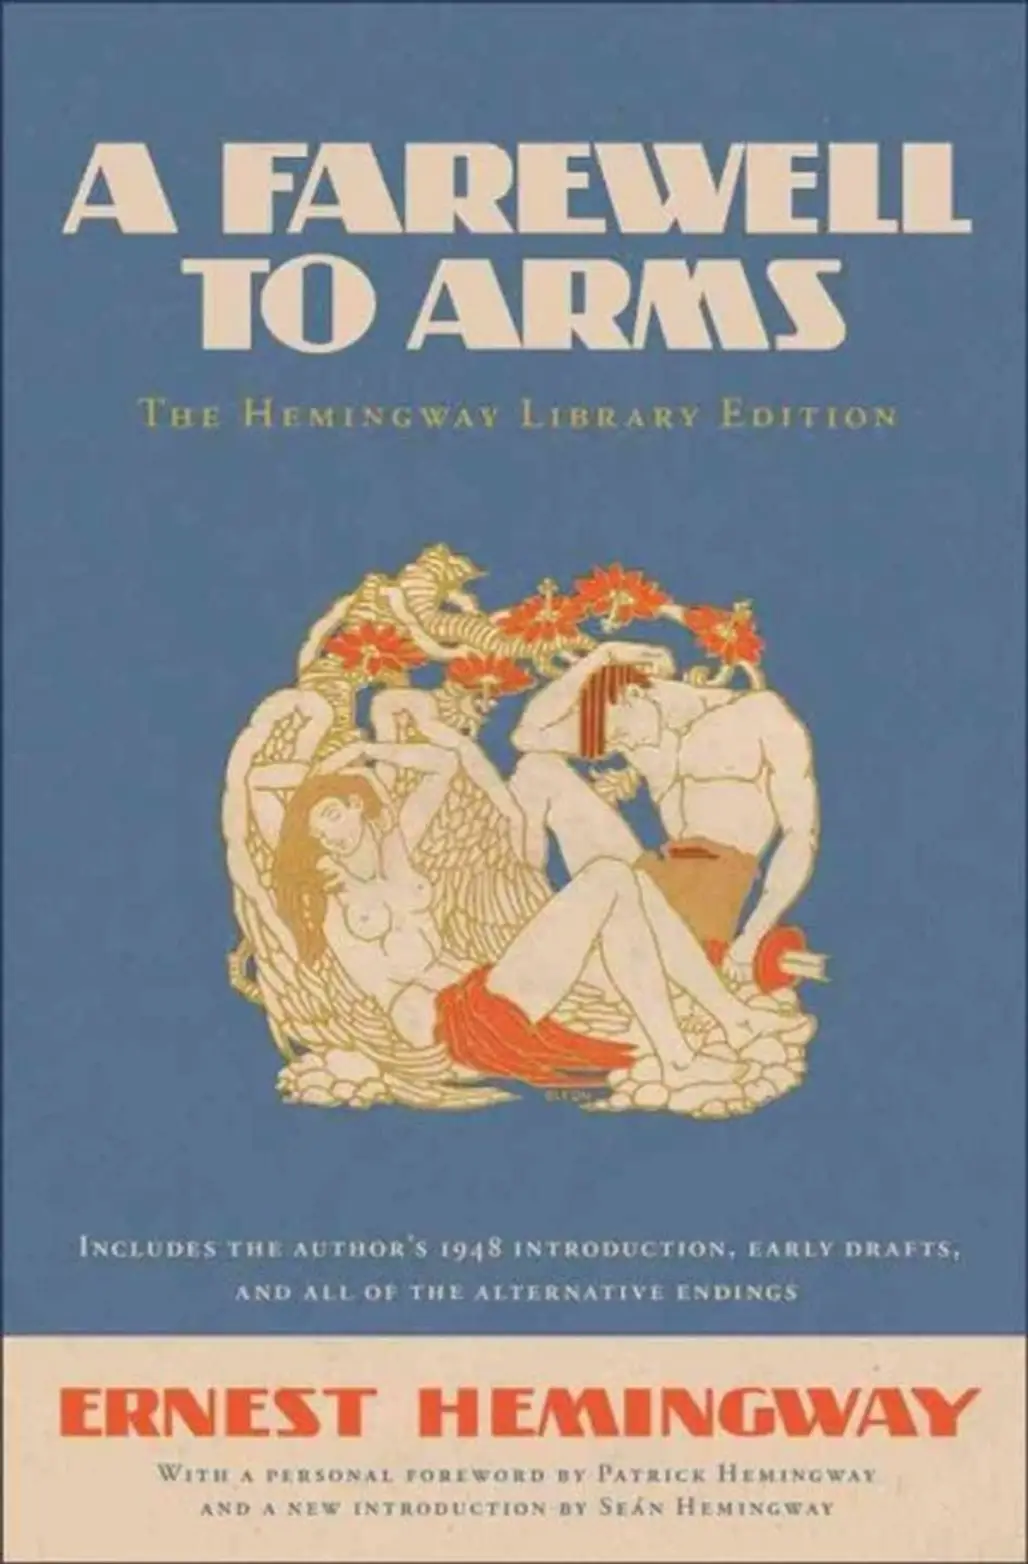 A Farewell to Arms – Ernest Hemingway